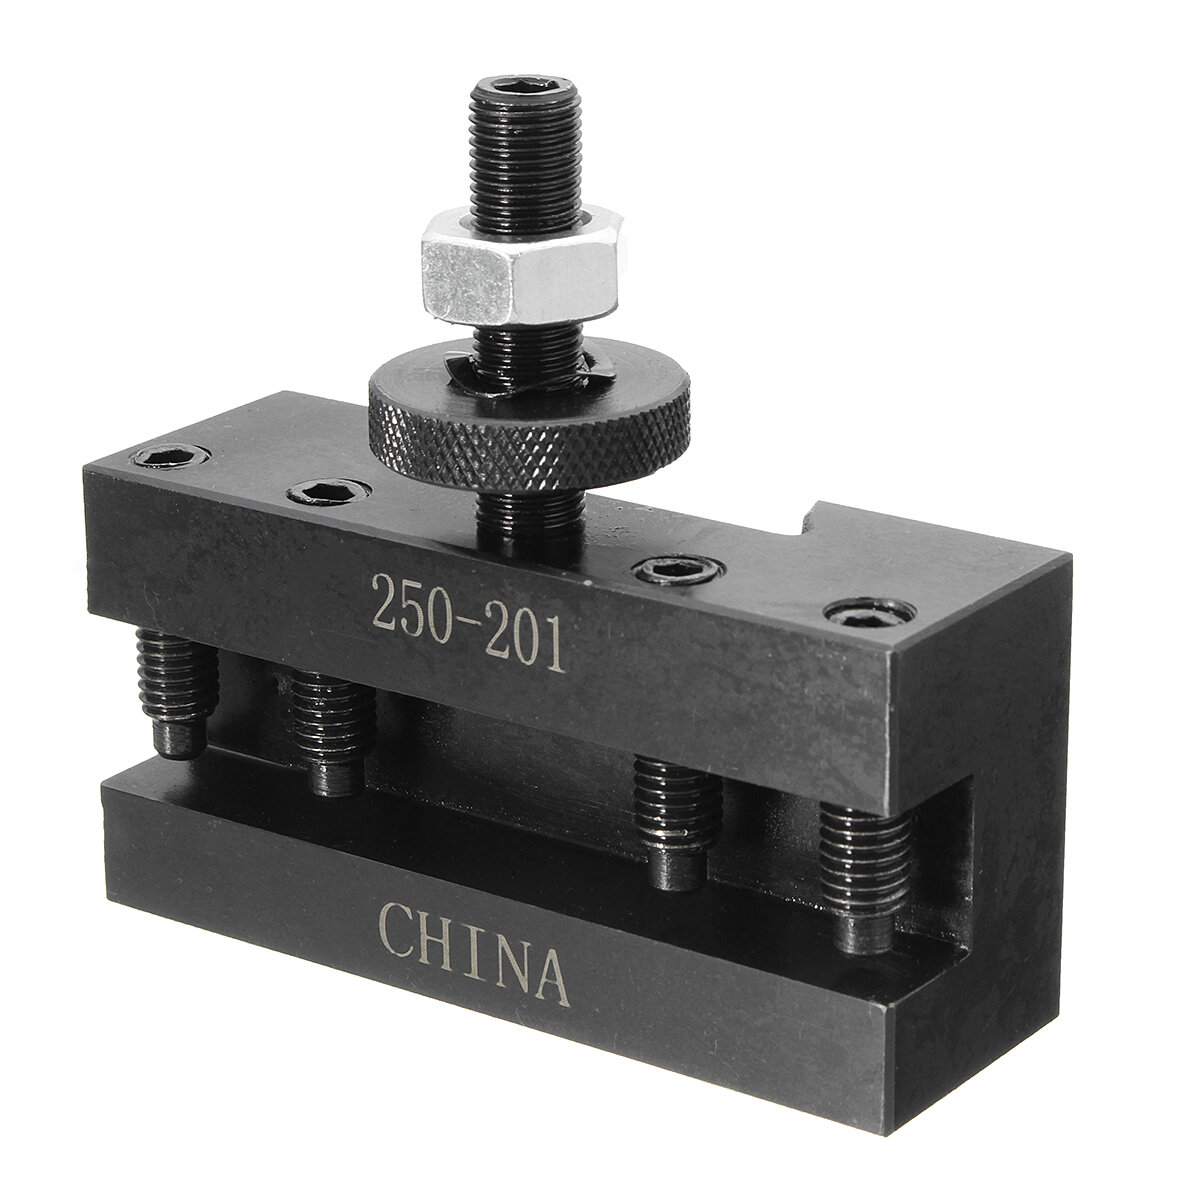 Machifit 250-201 202 204 207 210 Quick Change Tool Holder Turning and Facing Holder for Lathe Tools